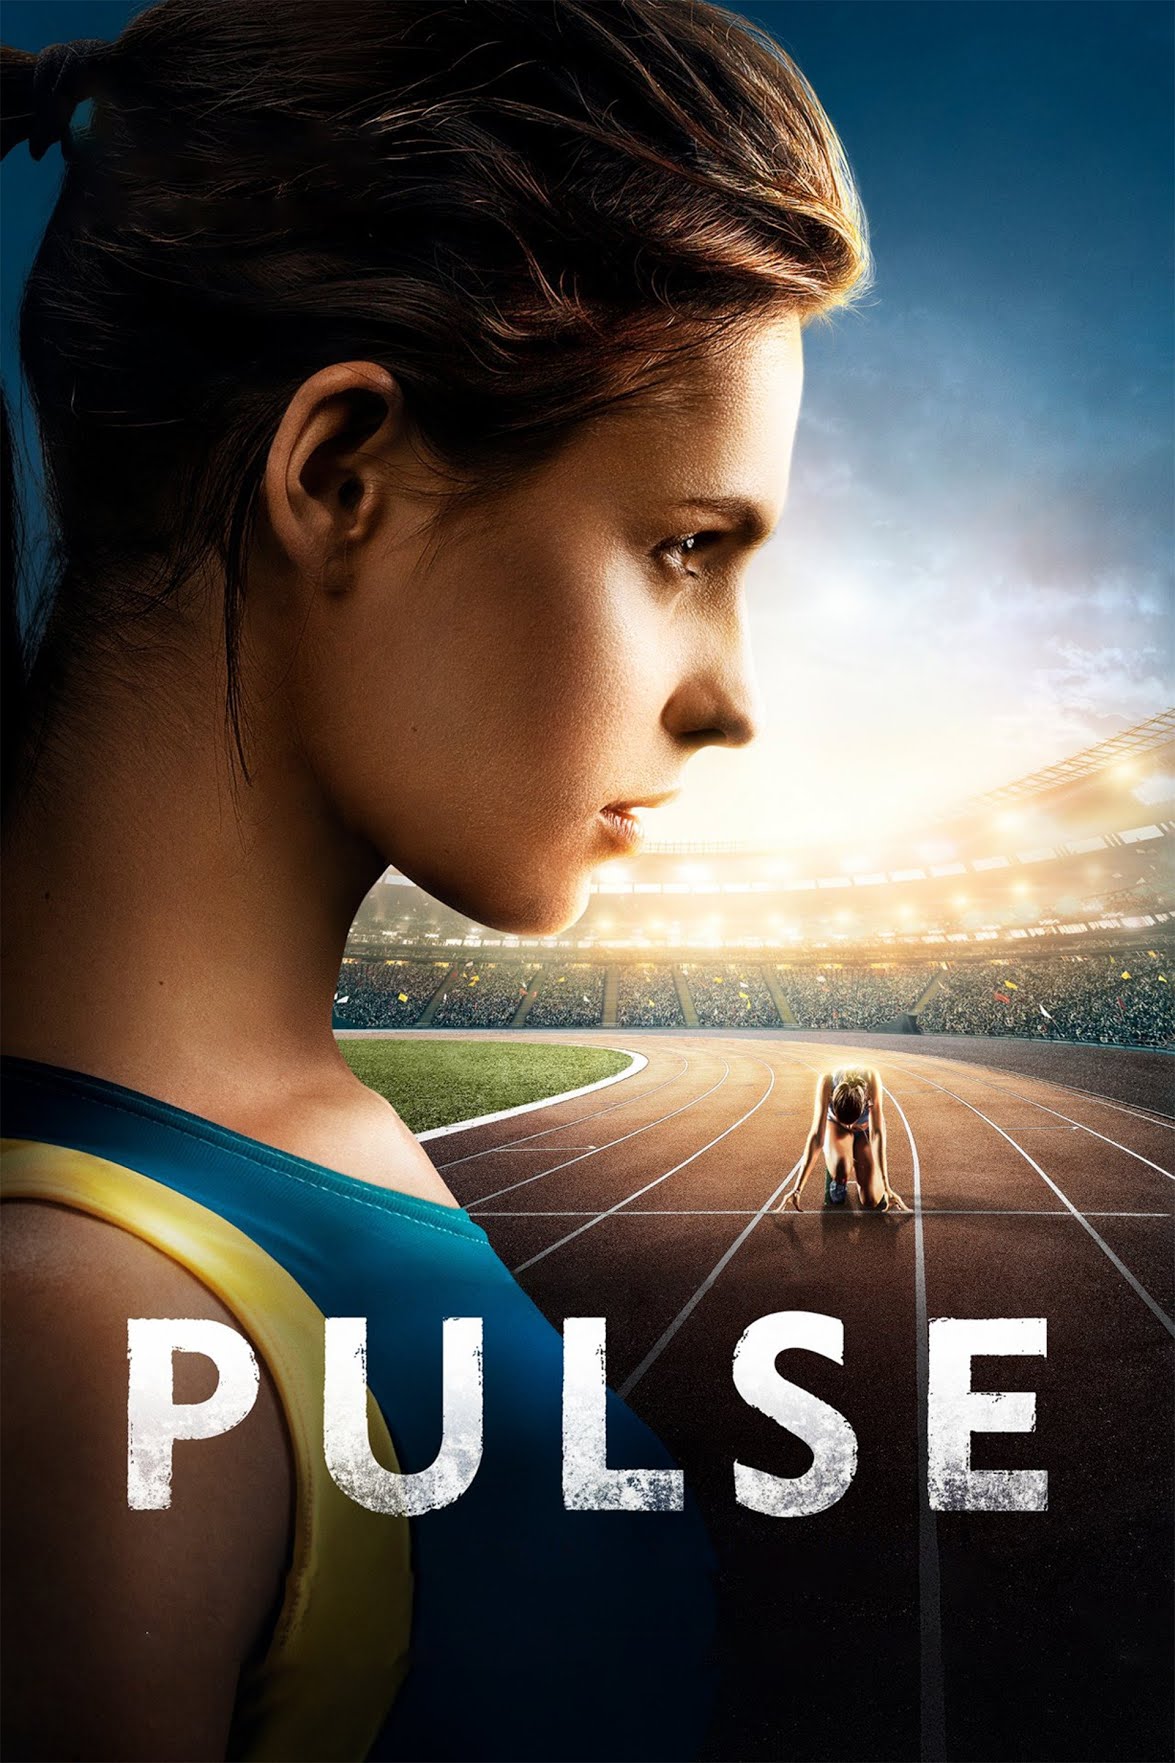 Pulso (Pulse) (2021) 1080p Online Images?q=tbn:ANd9GcTmJOJikiyQydNNLiJLUpE6JmtLIZWxM6T7UrME46-pXAc4zo7S